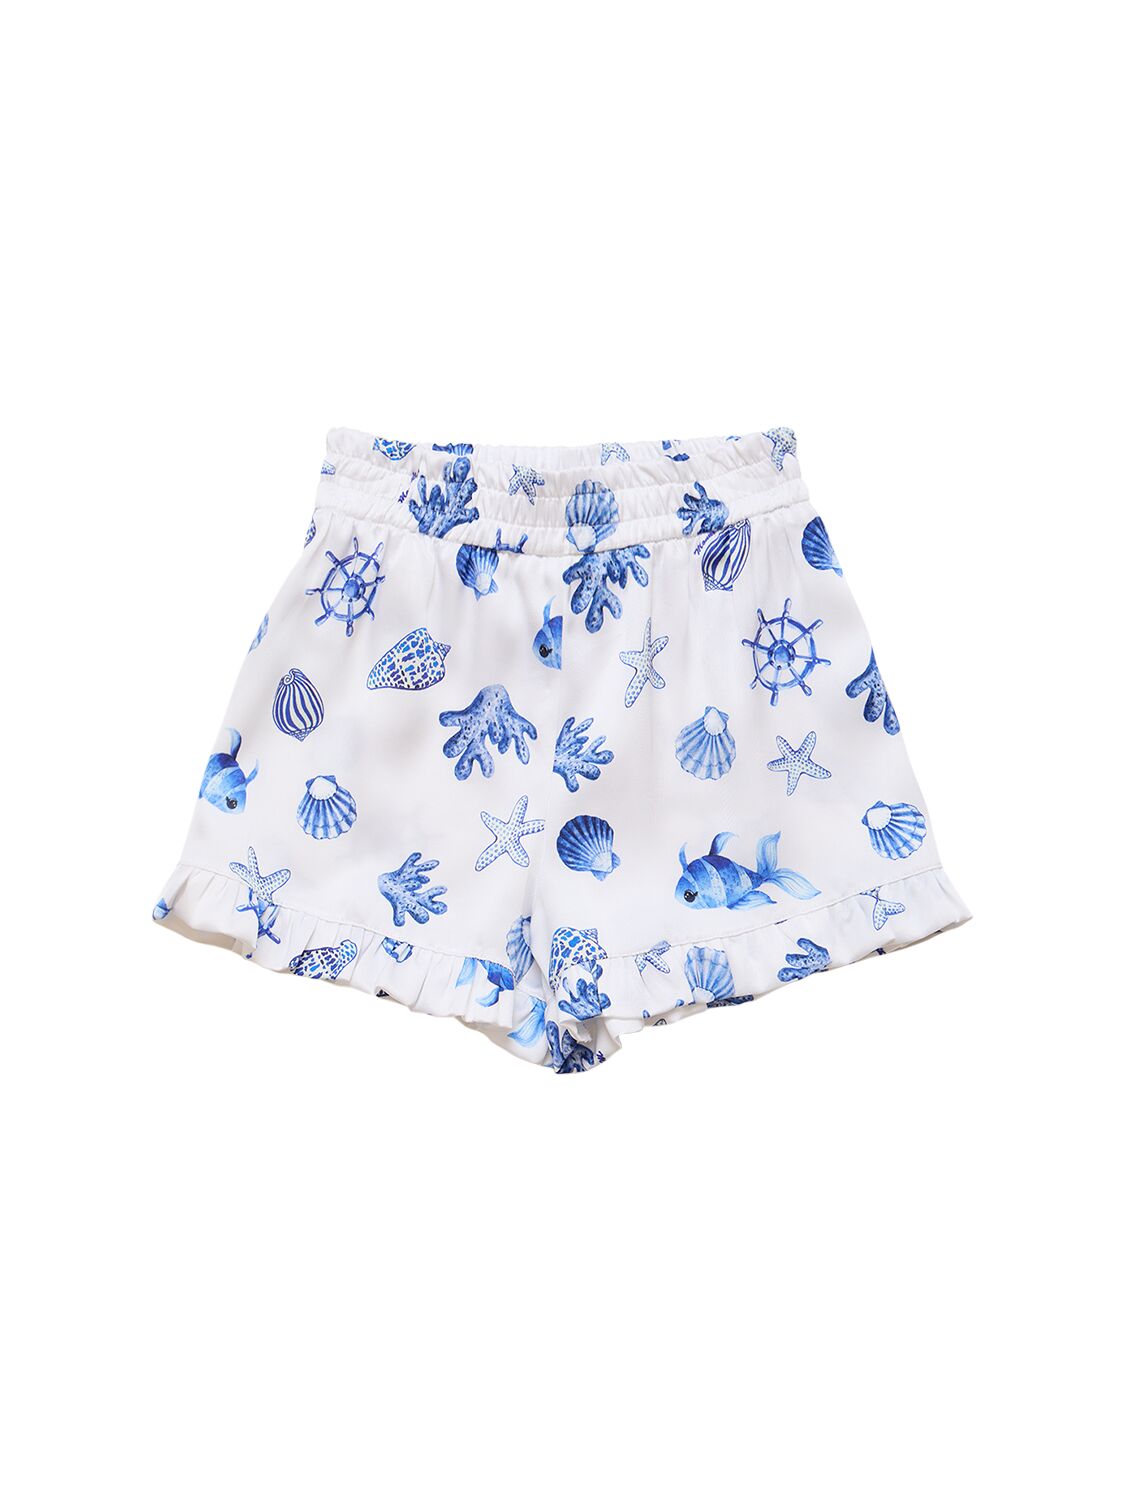 Image of Printed Cotton Blend Shorts